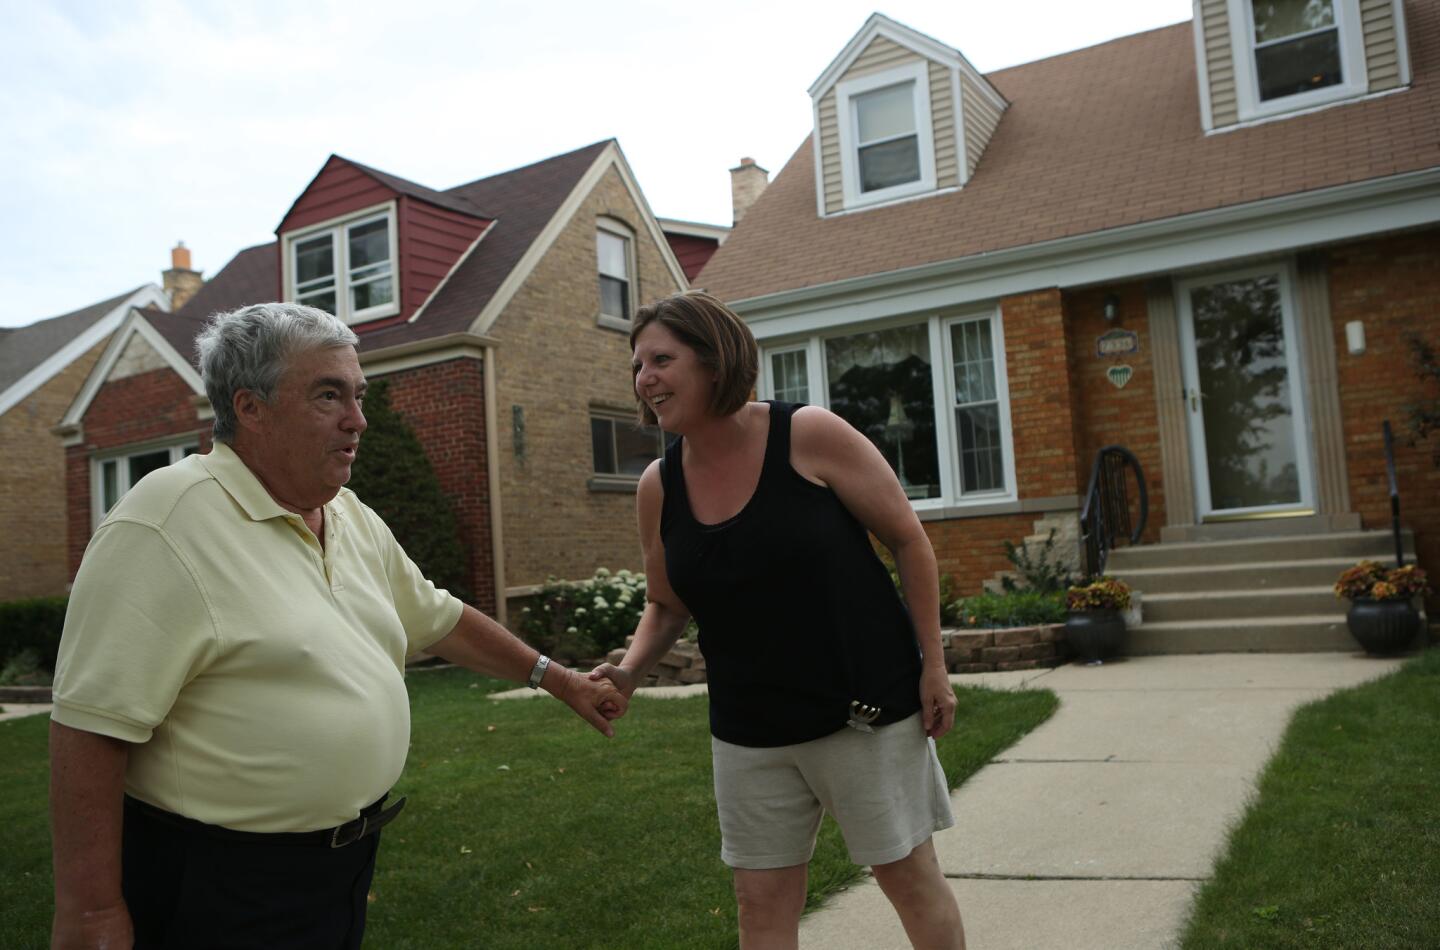 Kathy McDermott recognizes Jerry Krause as he tries to pick out his childhood home on Everell Avenue on June 21, 2012.